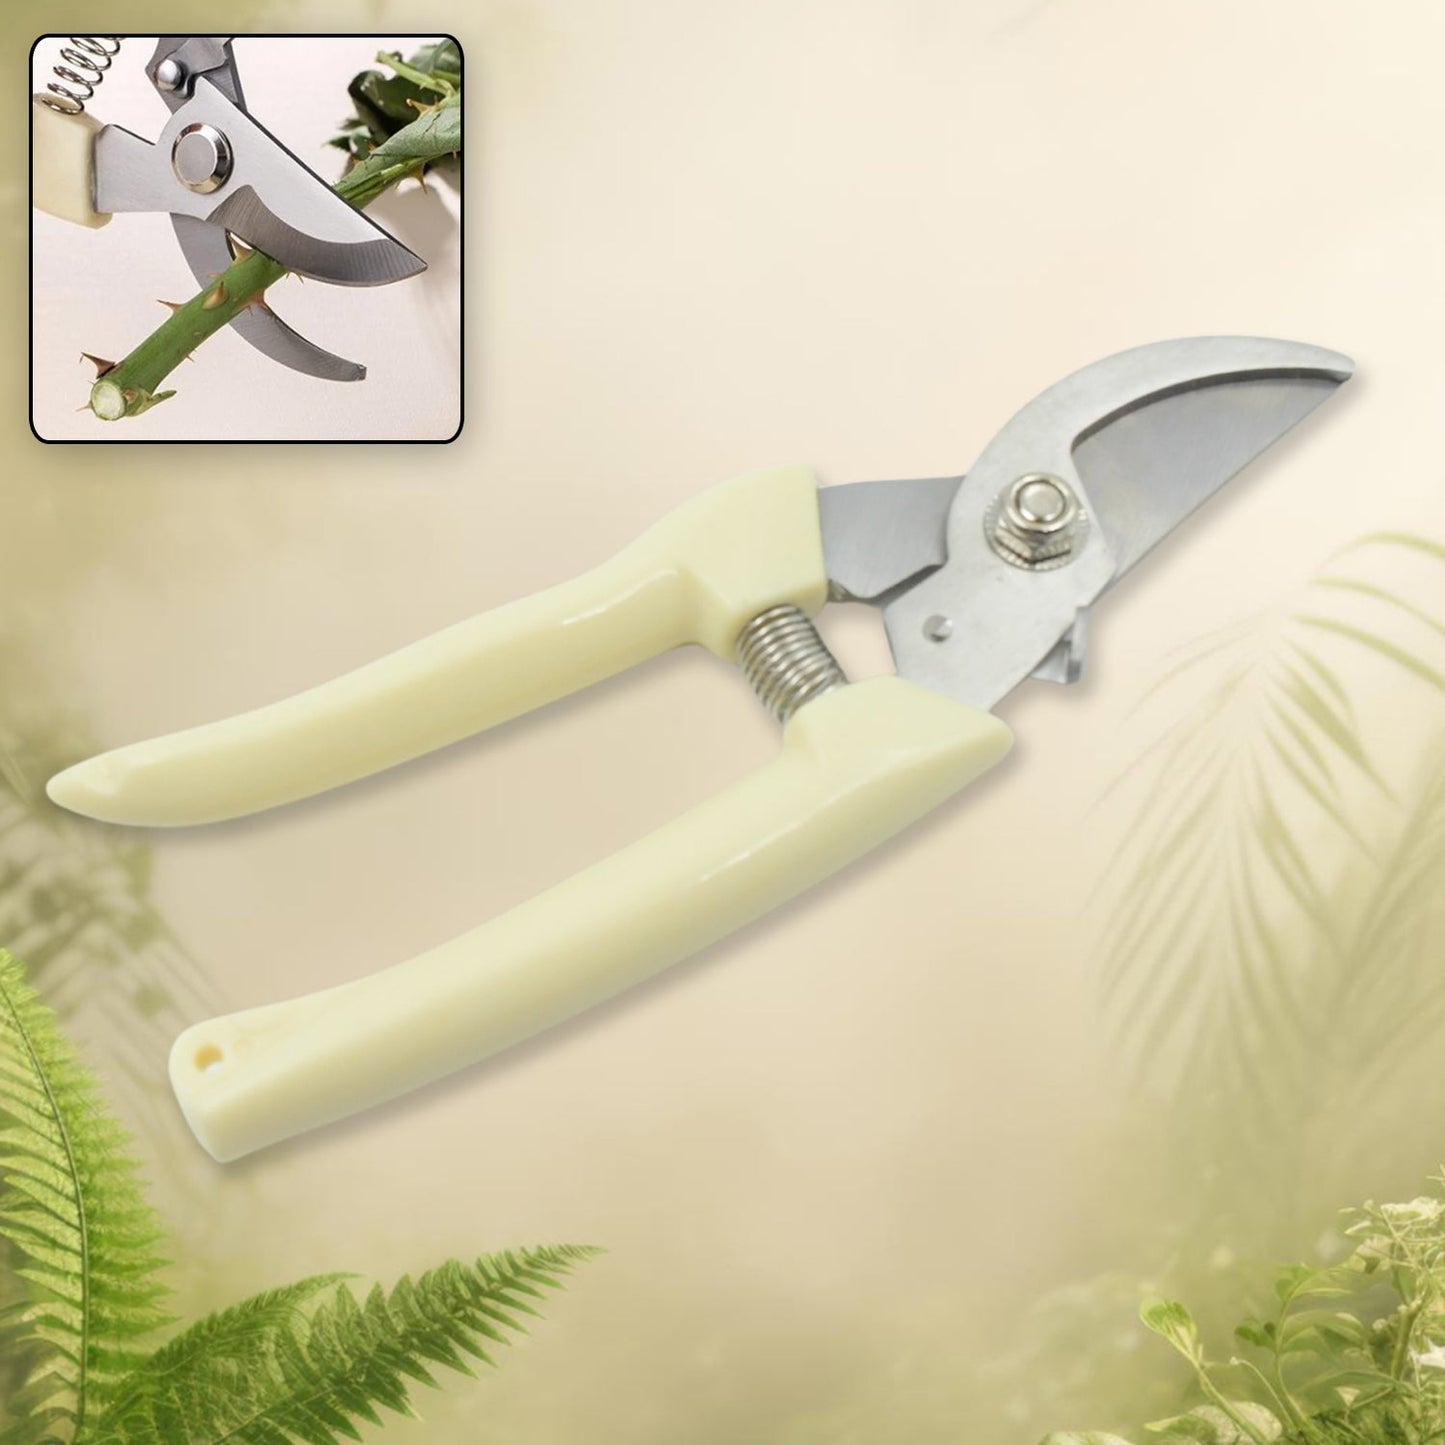 0471 Stainless Steel Pruning Shears with Sharp Blades and Comfortable handle - Durable Hand Pruner for Comfortable and Easy Cutting, Heavy Duty Gardening Cutter Tool Plant Cutter for Home Garden | Wood Bran (1 Pc)